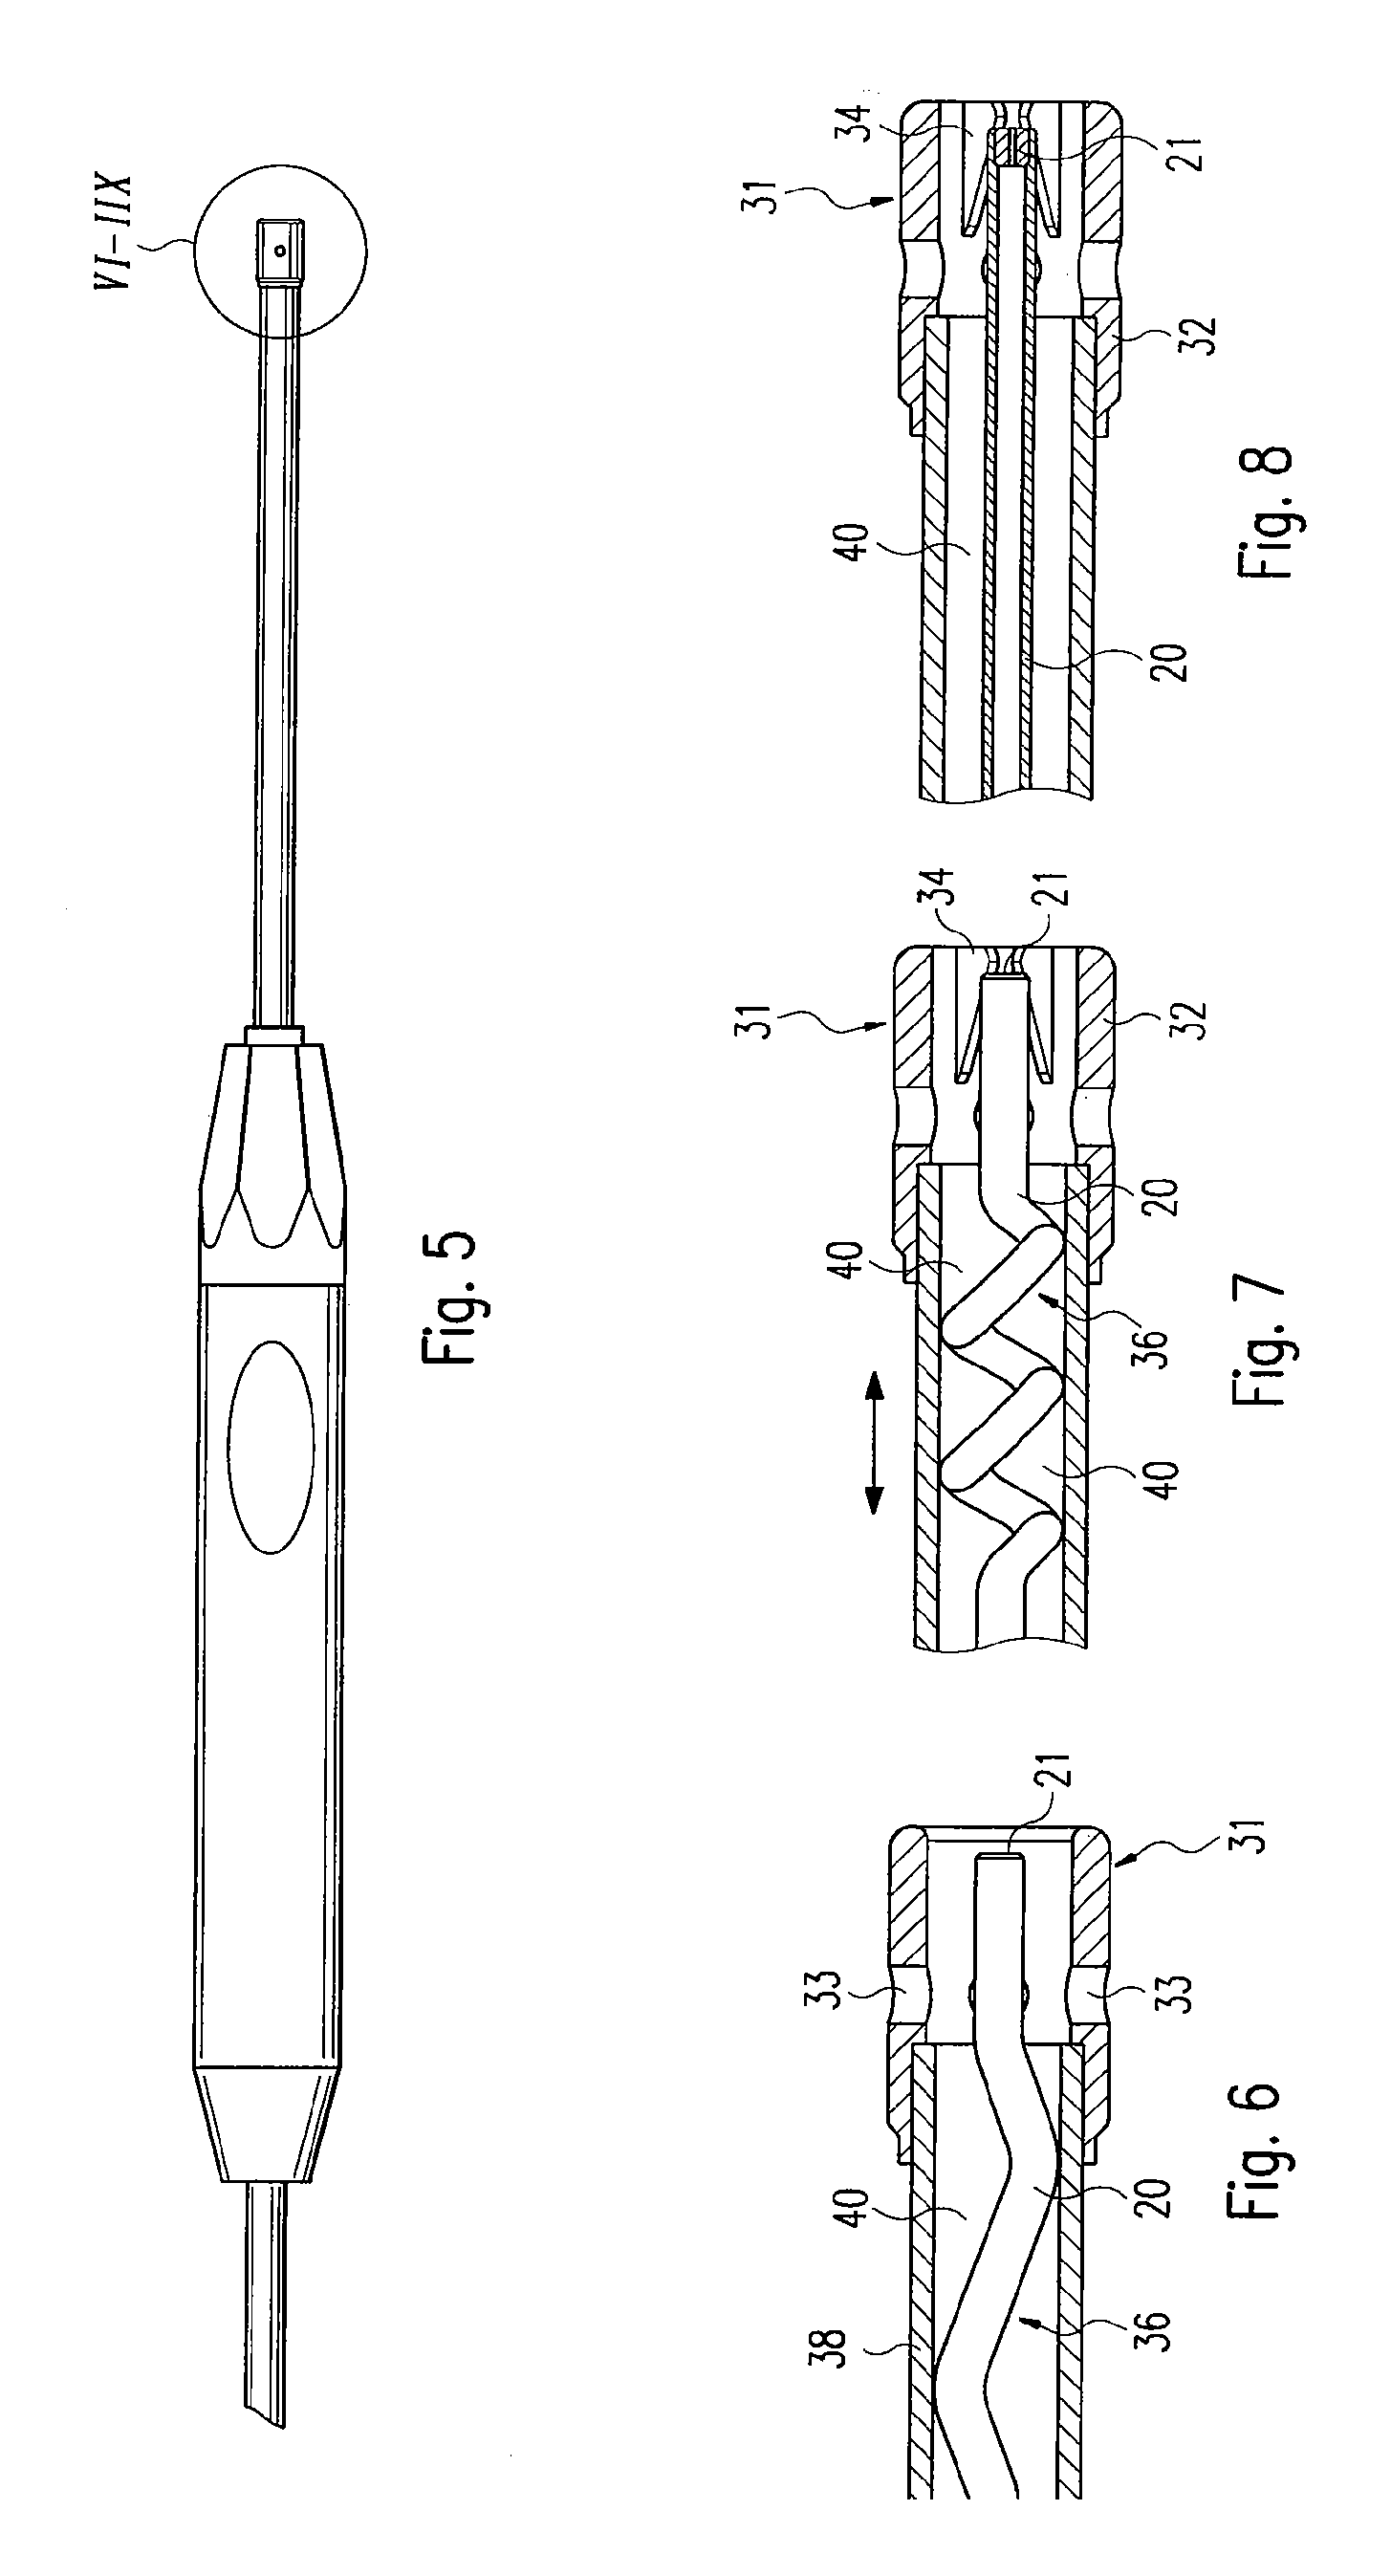 Applicator For Water-Jet Surgery